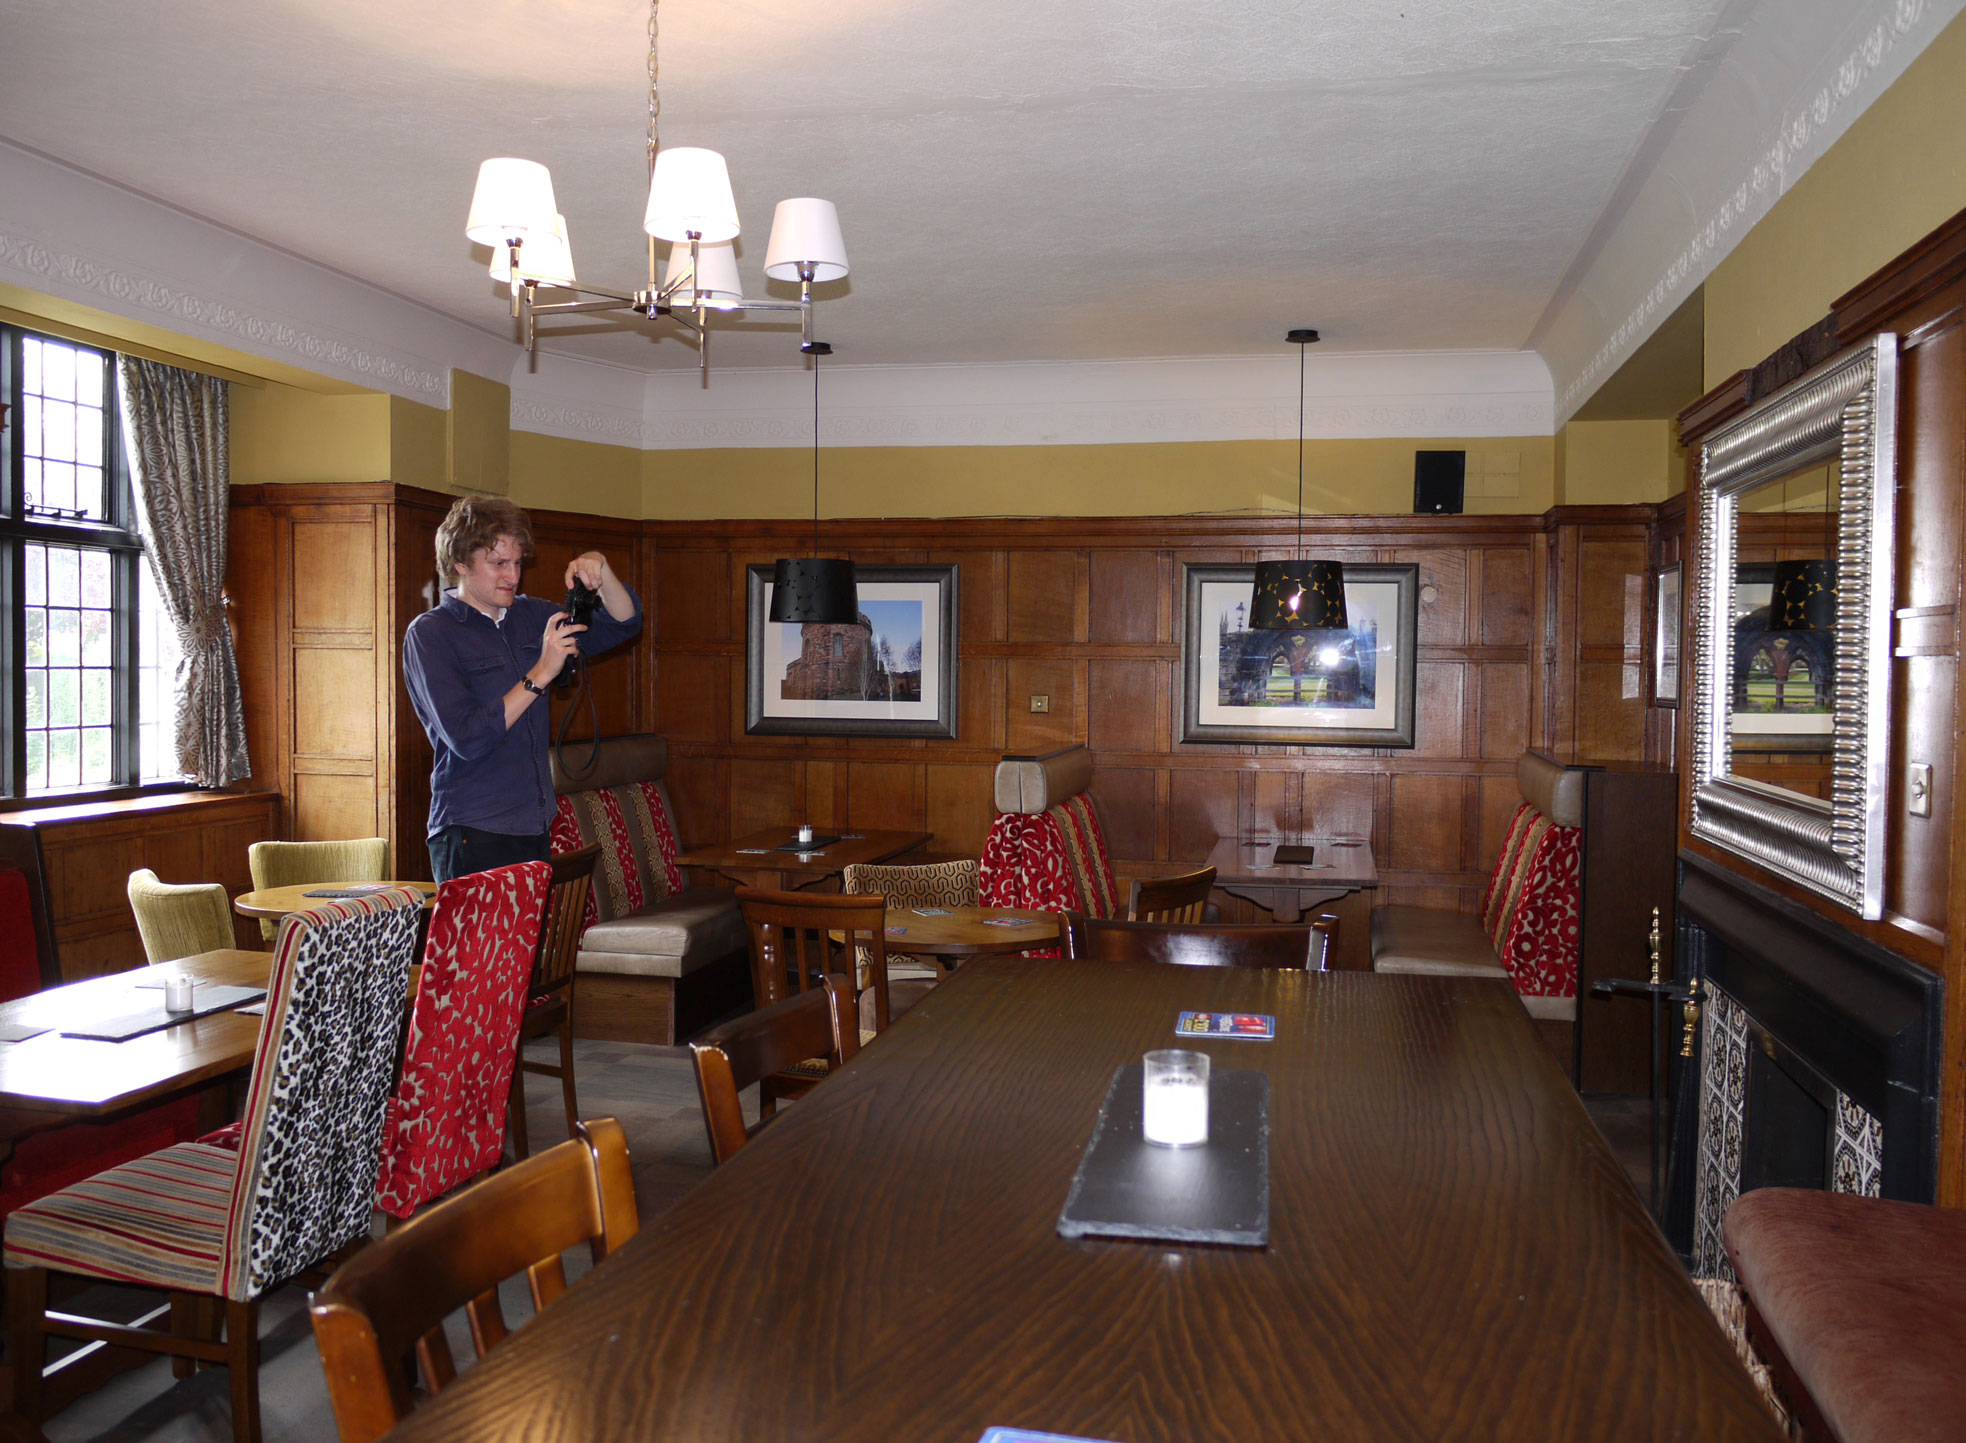 A Historic England Investigator taking photographs of the interior of a historic public house, the Redfern Inn